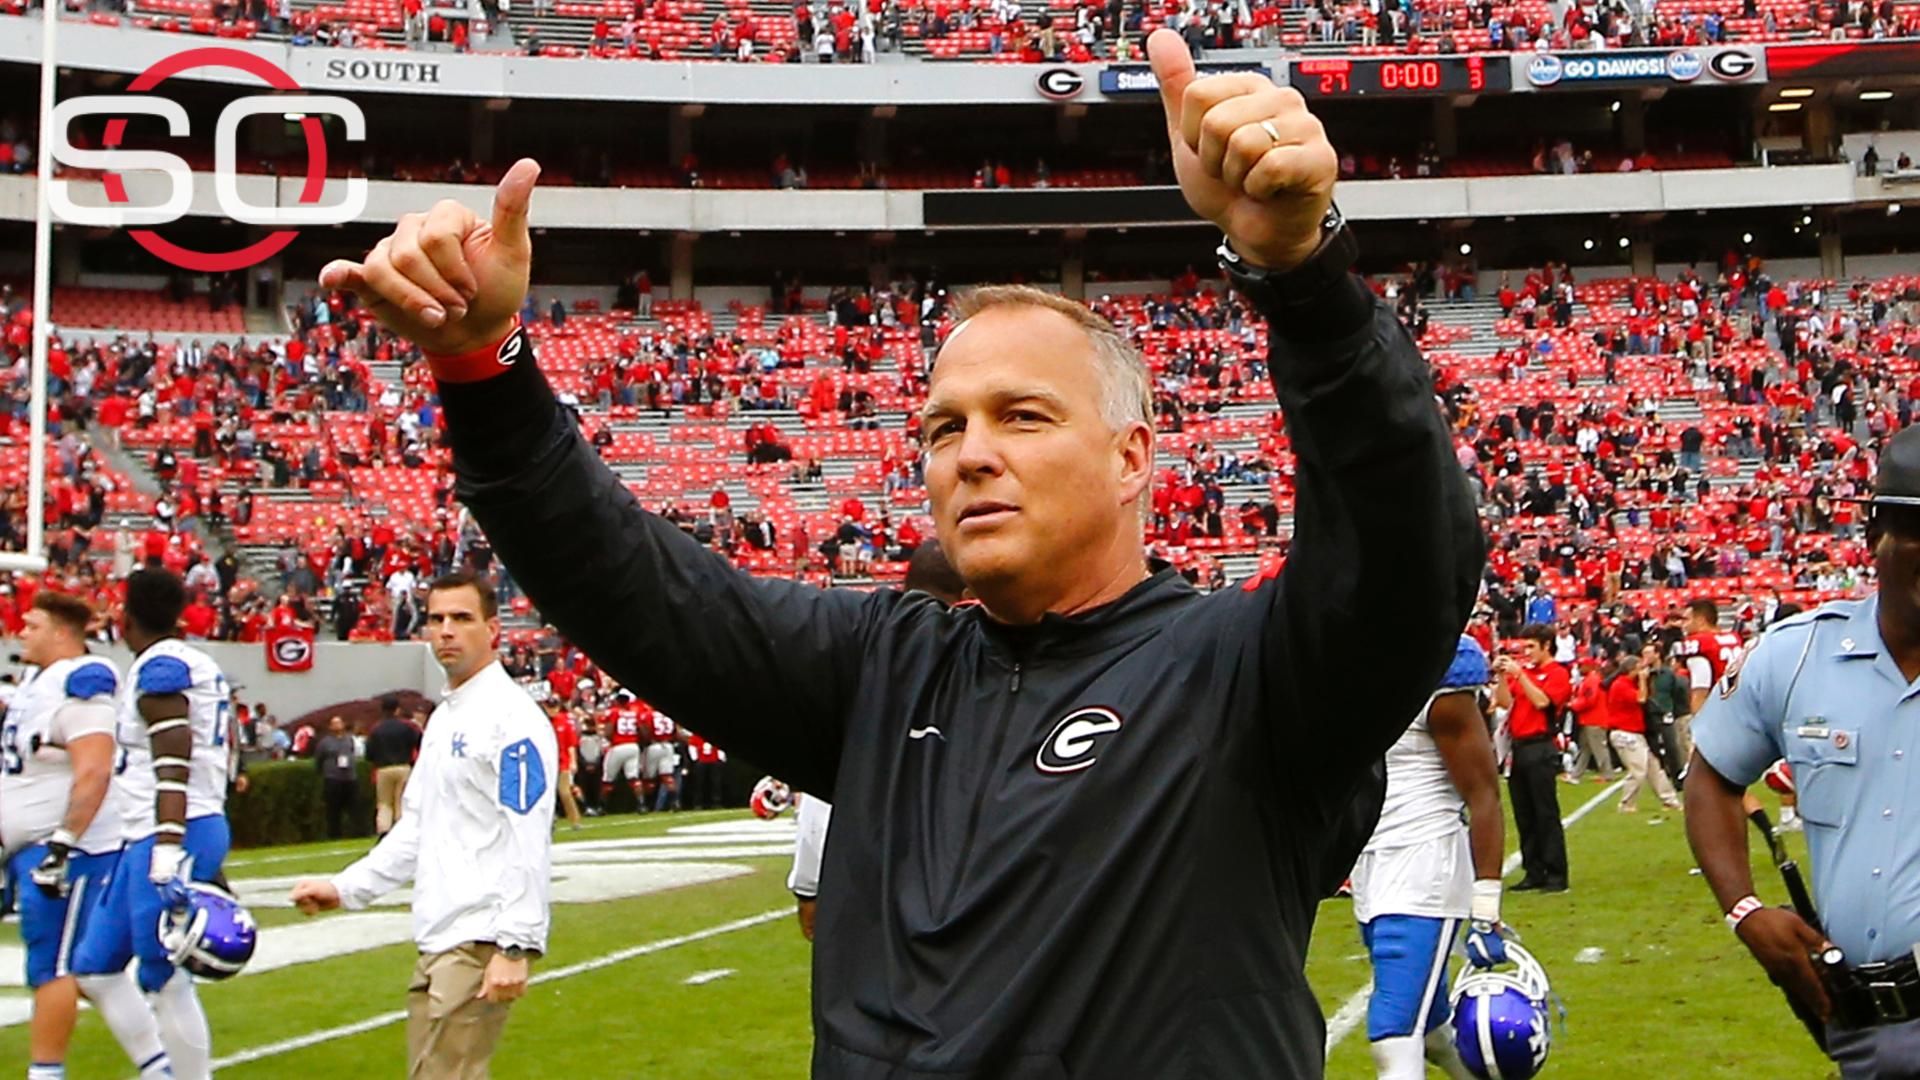 Sources: Mark Richt to be named new Hurricanes coach - ABC7 Chicago